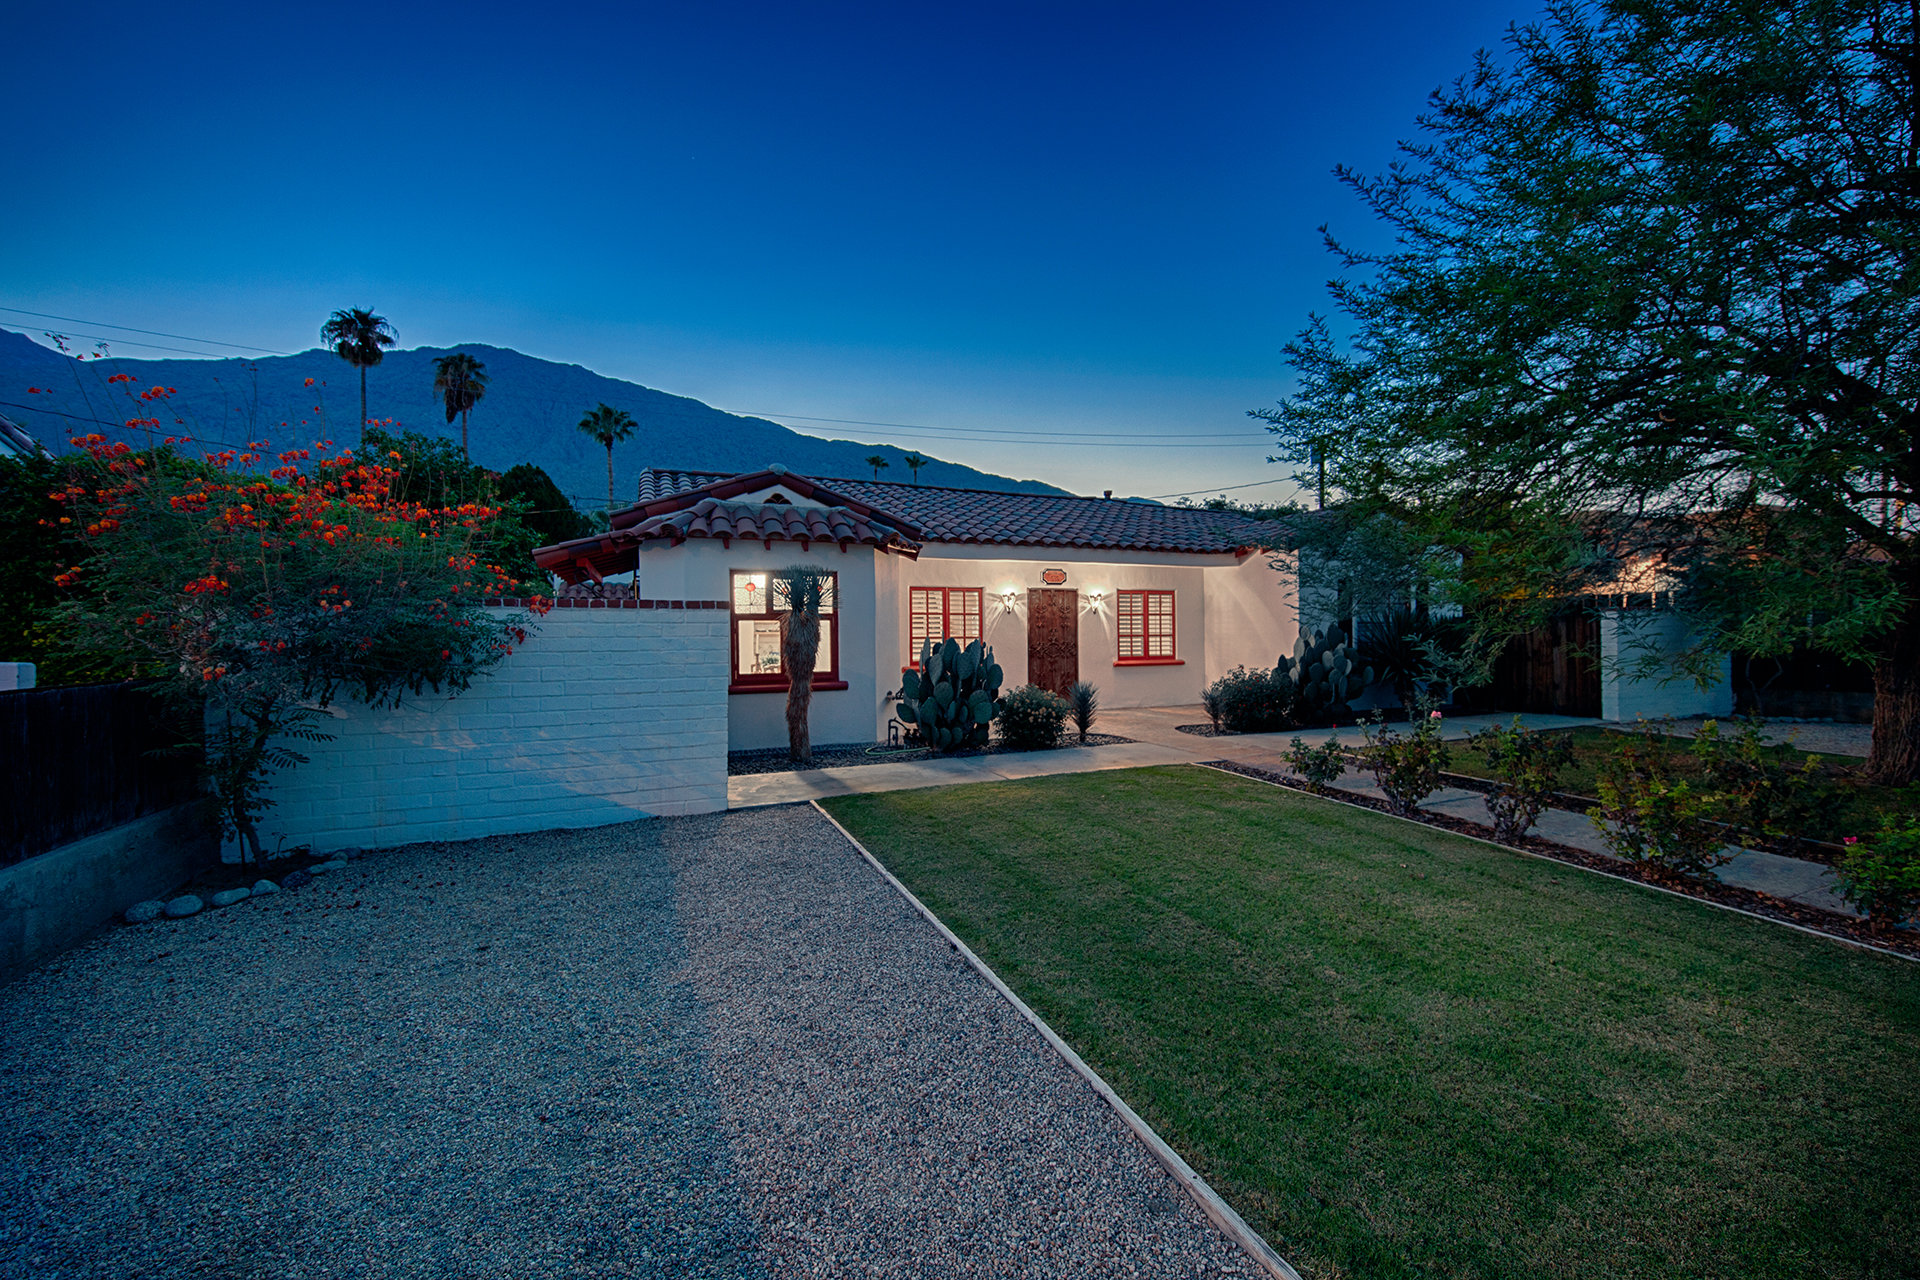 A Spanish Revival home in the Warm Sands neighborhood in Palm Springs, CA.